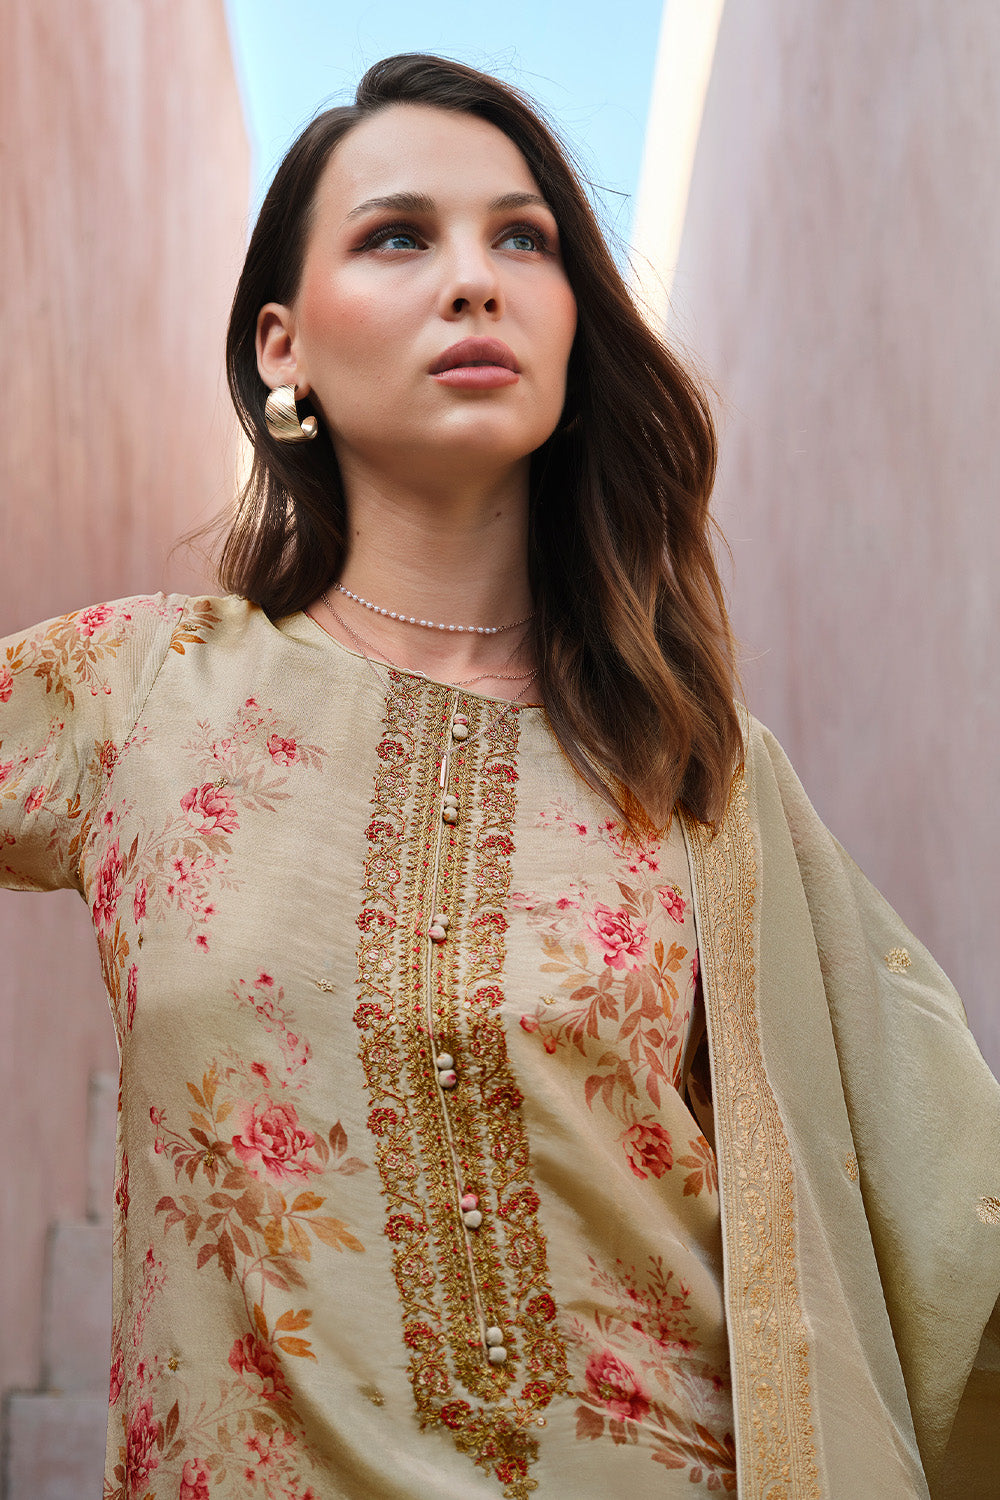 Beige Color Floral Printed & Neck Embroidered Unstitched Suit Material